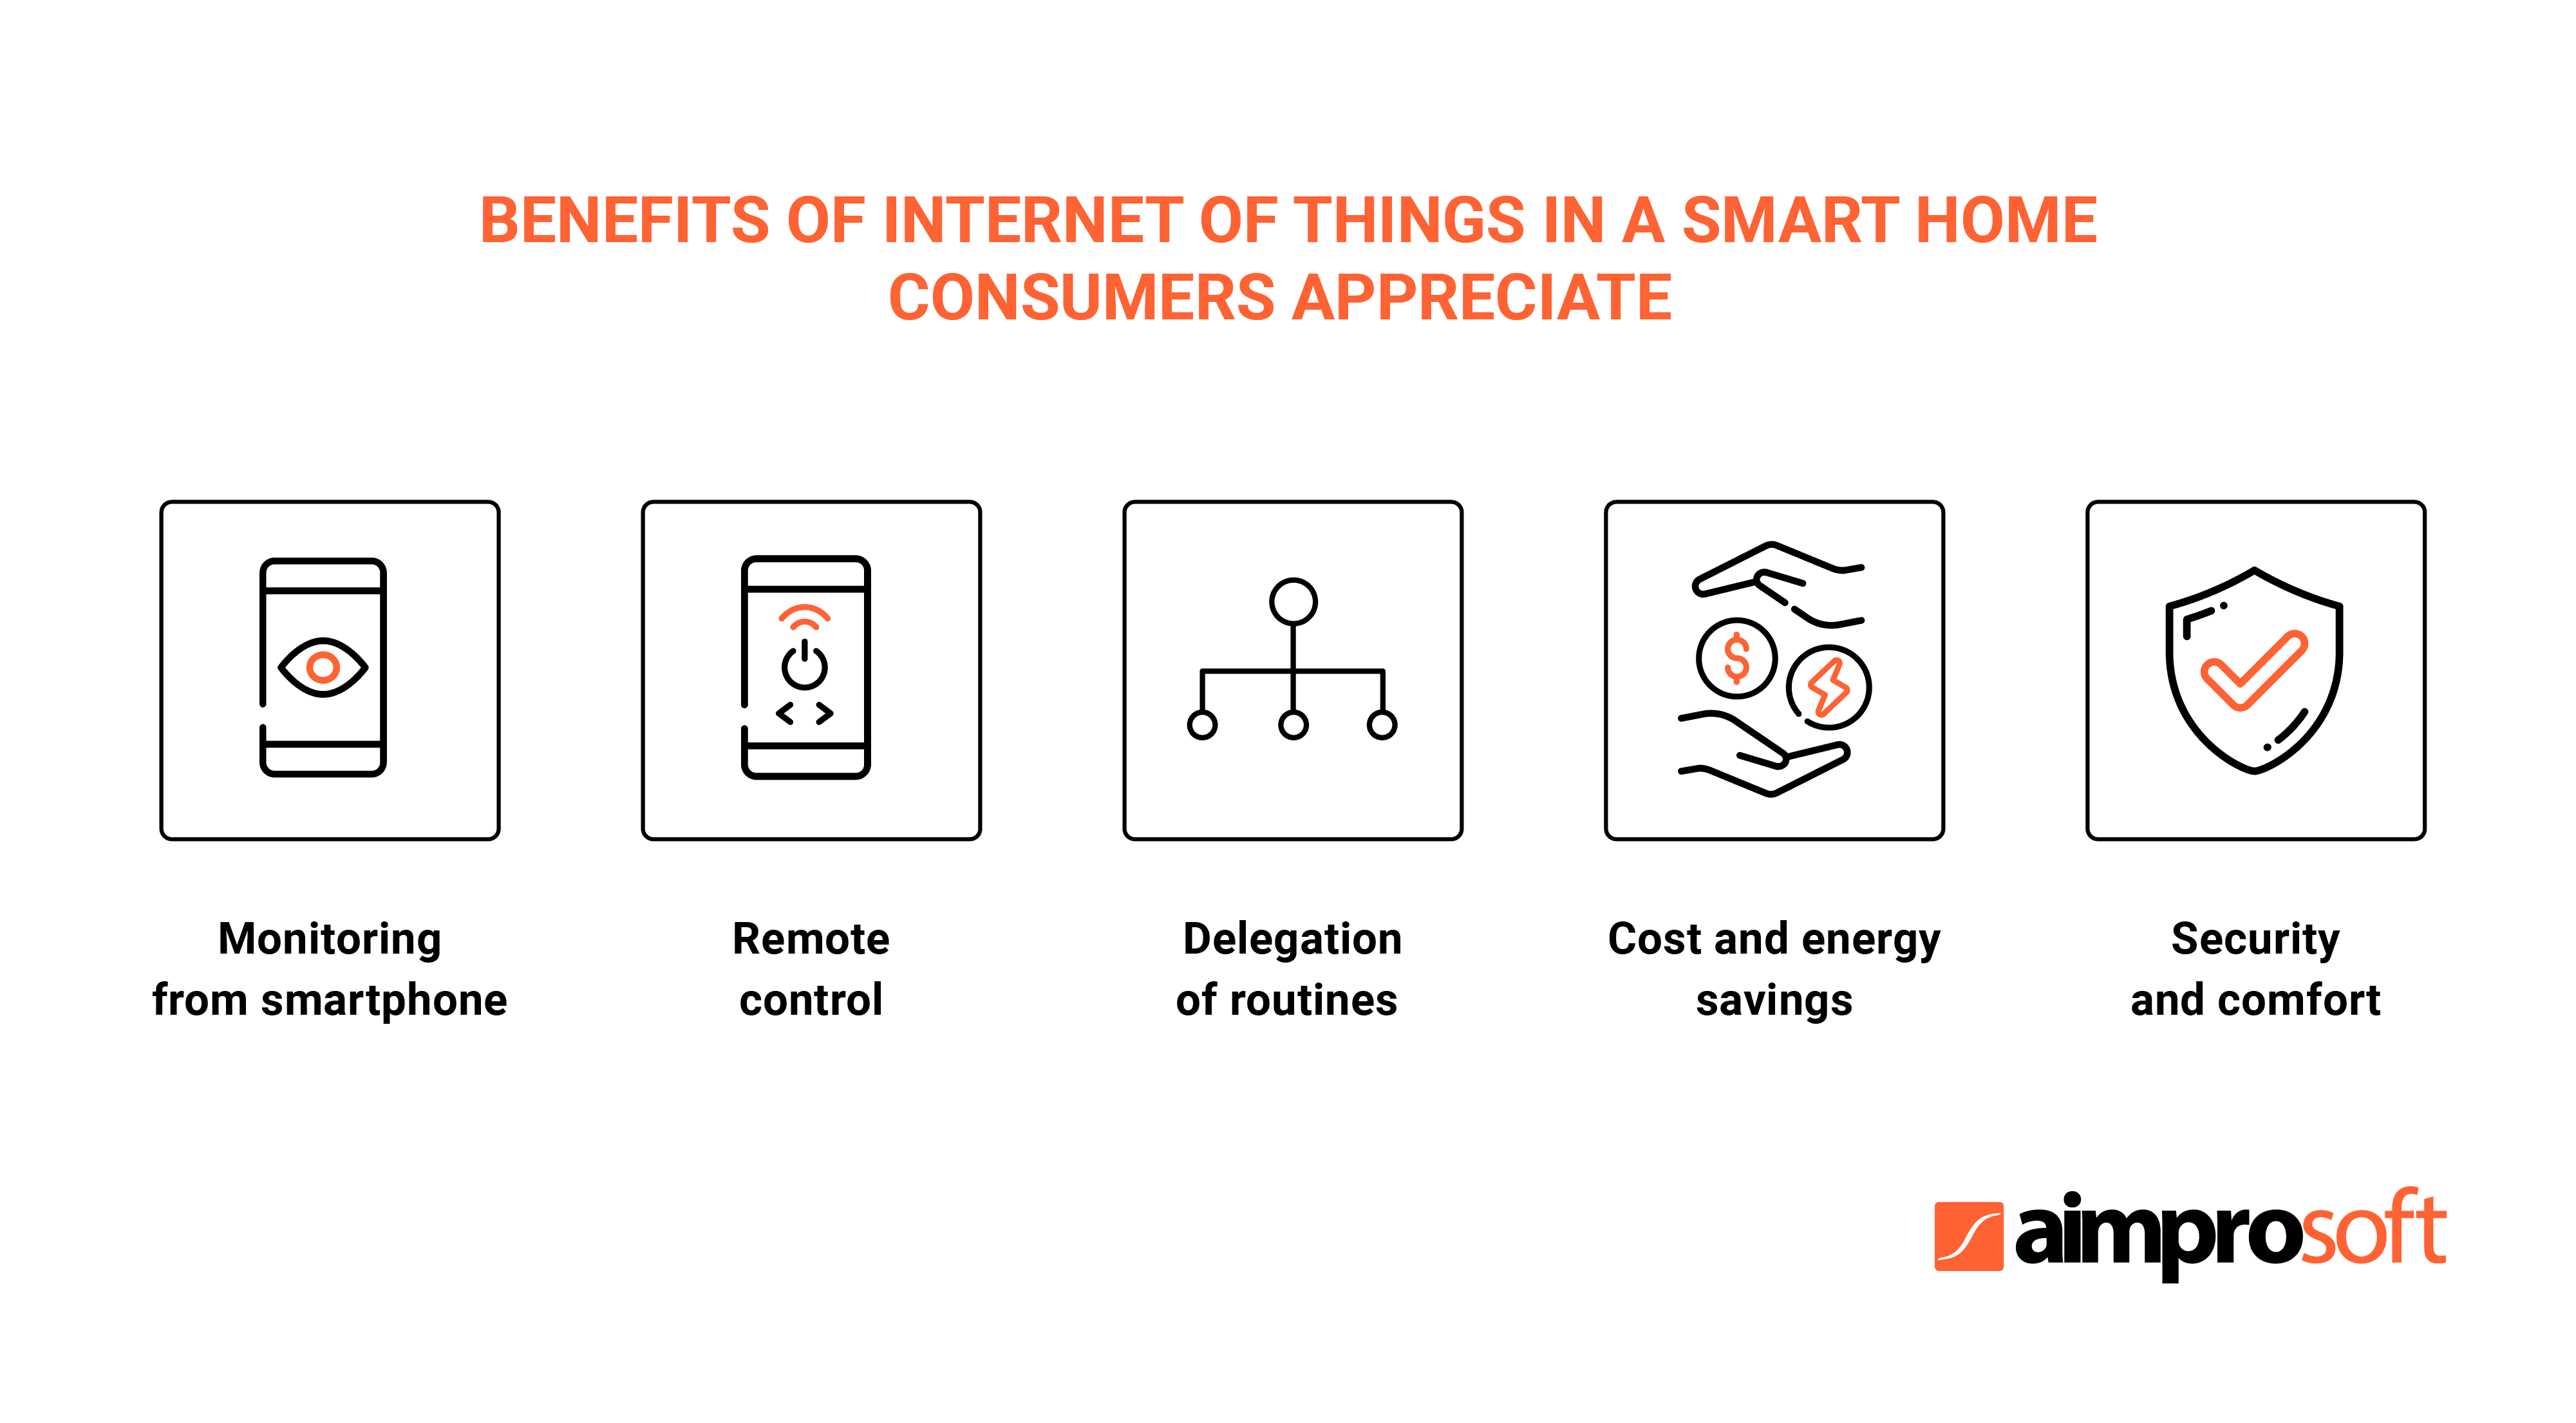 Benefits of Inthernet of Things in a smart home consumers appreciate